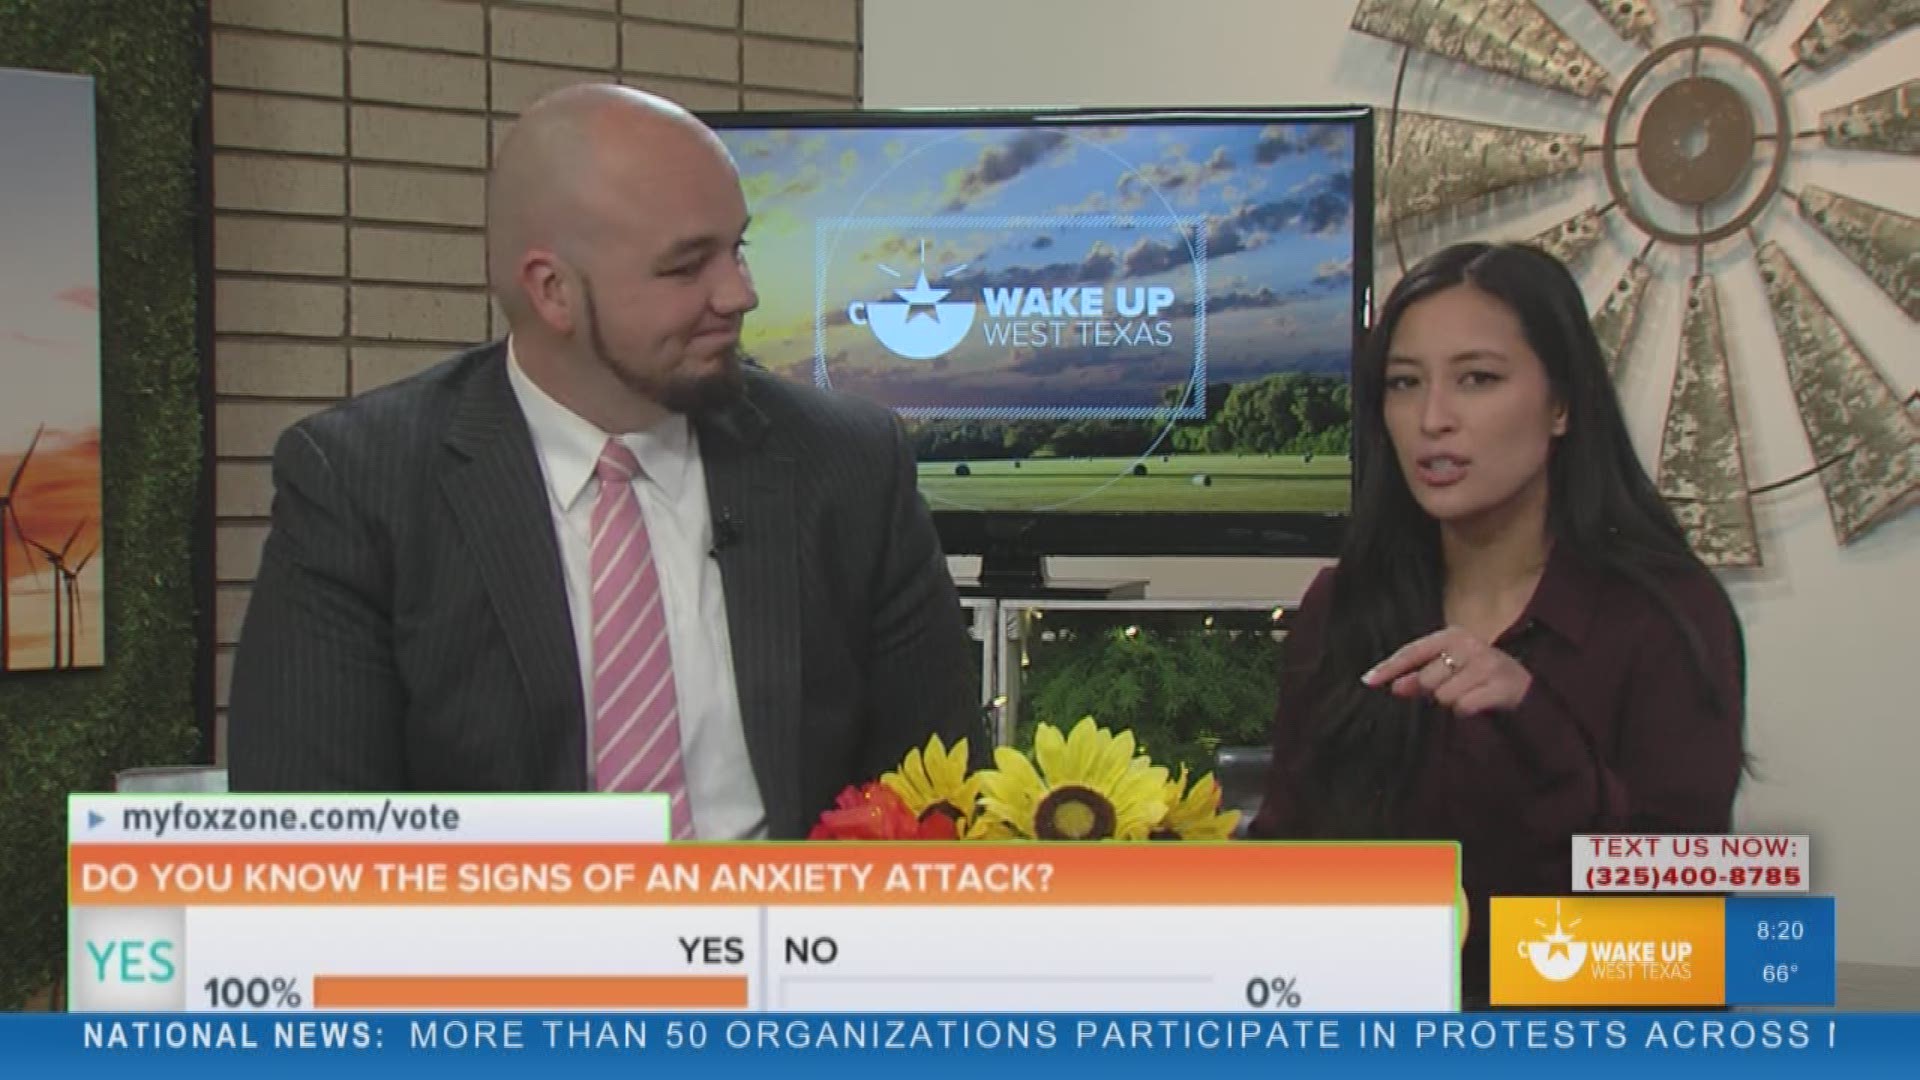 Our Camille Requiestas spoke to Dr. Drew Curtis from Angelo State University about the myths and misconceptions of anxiety.